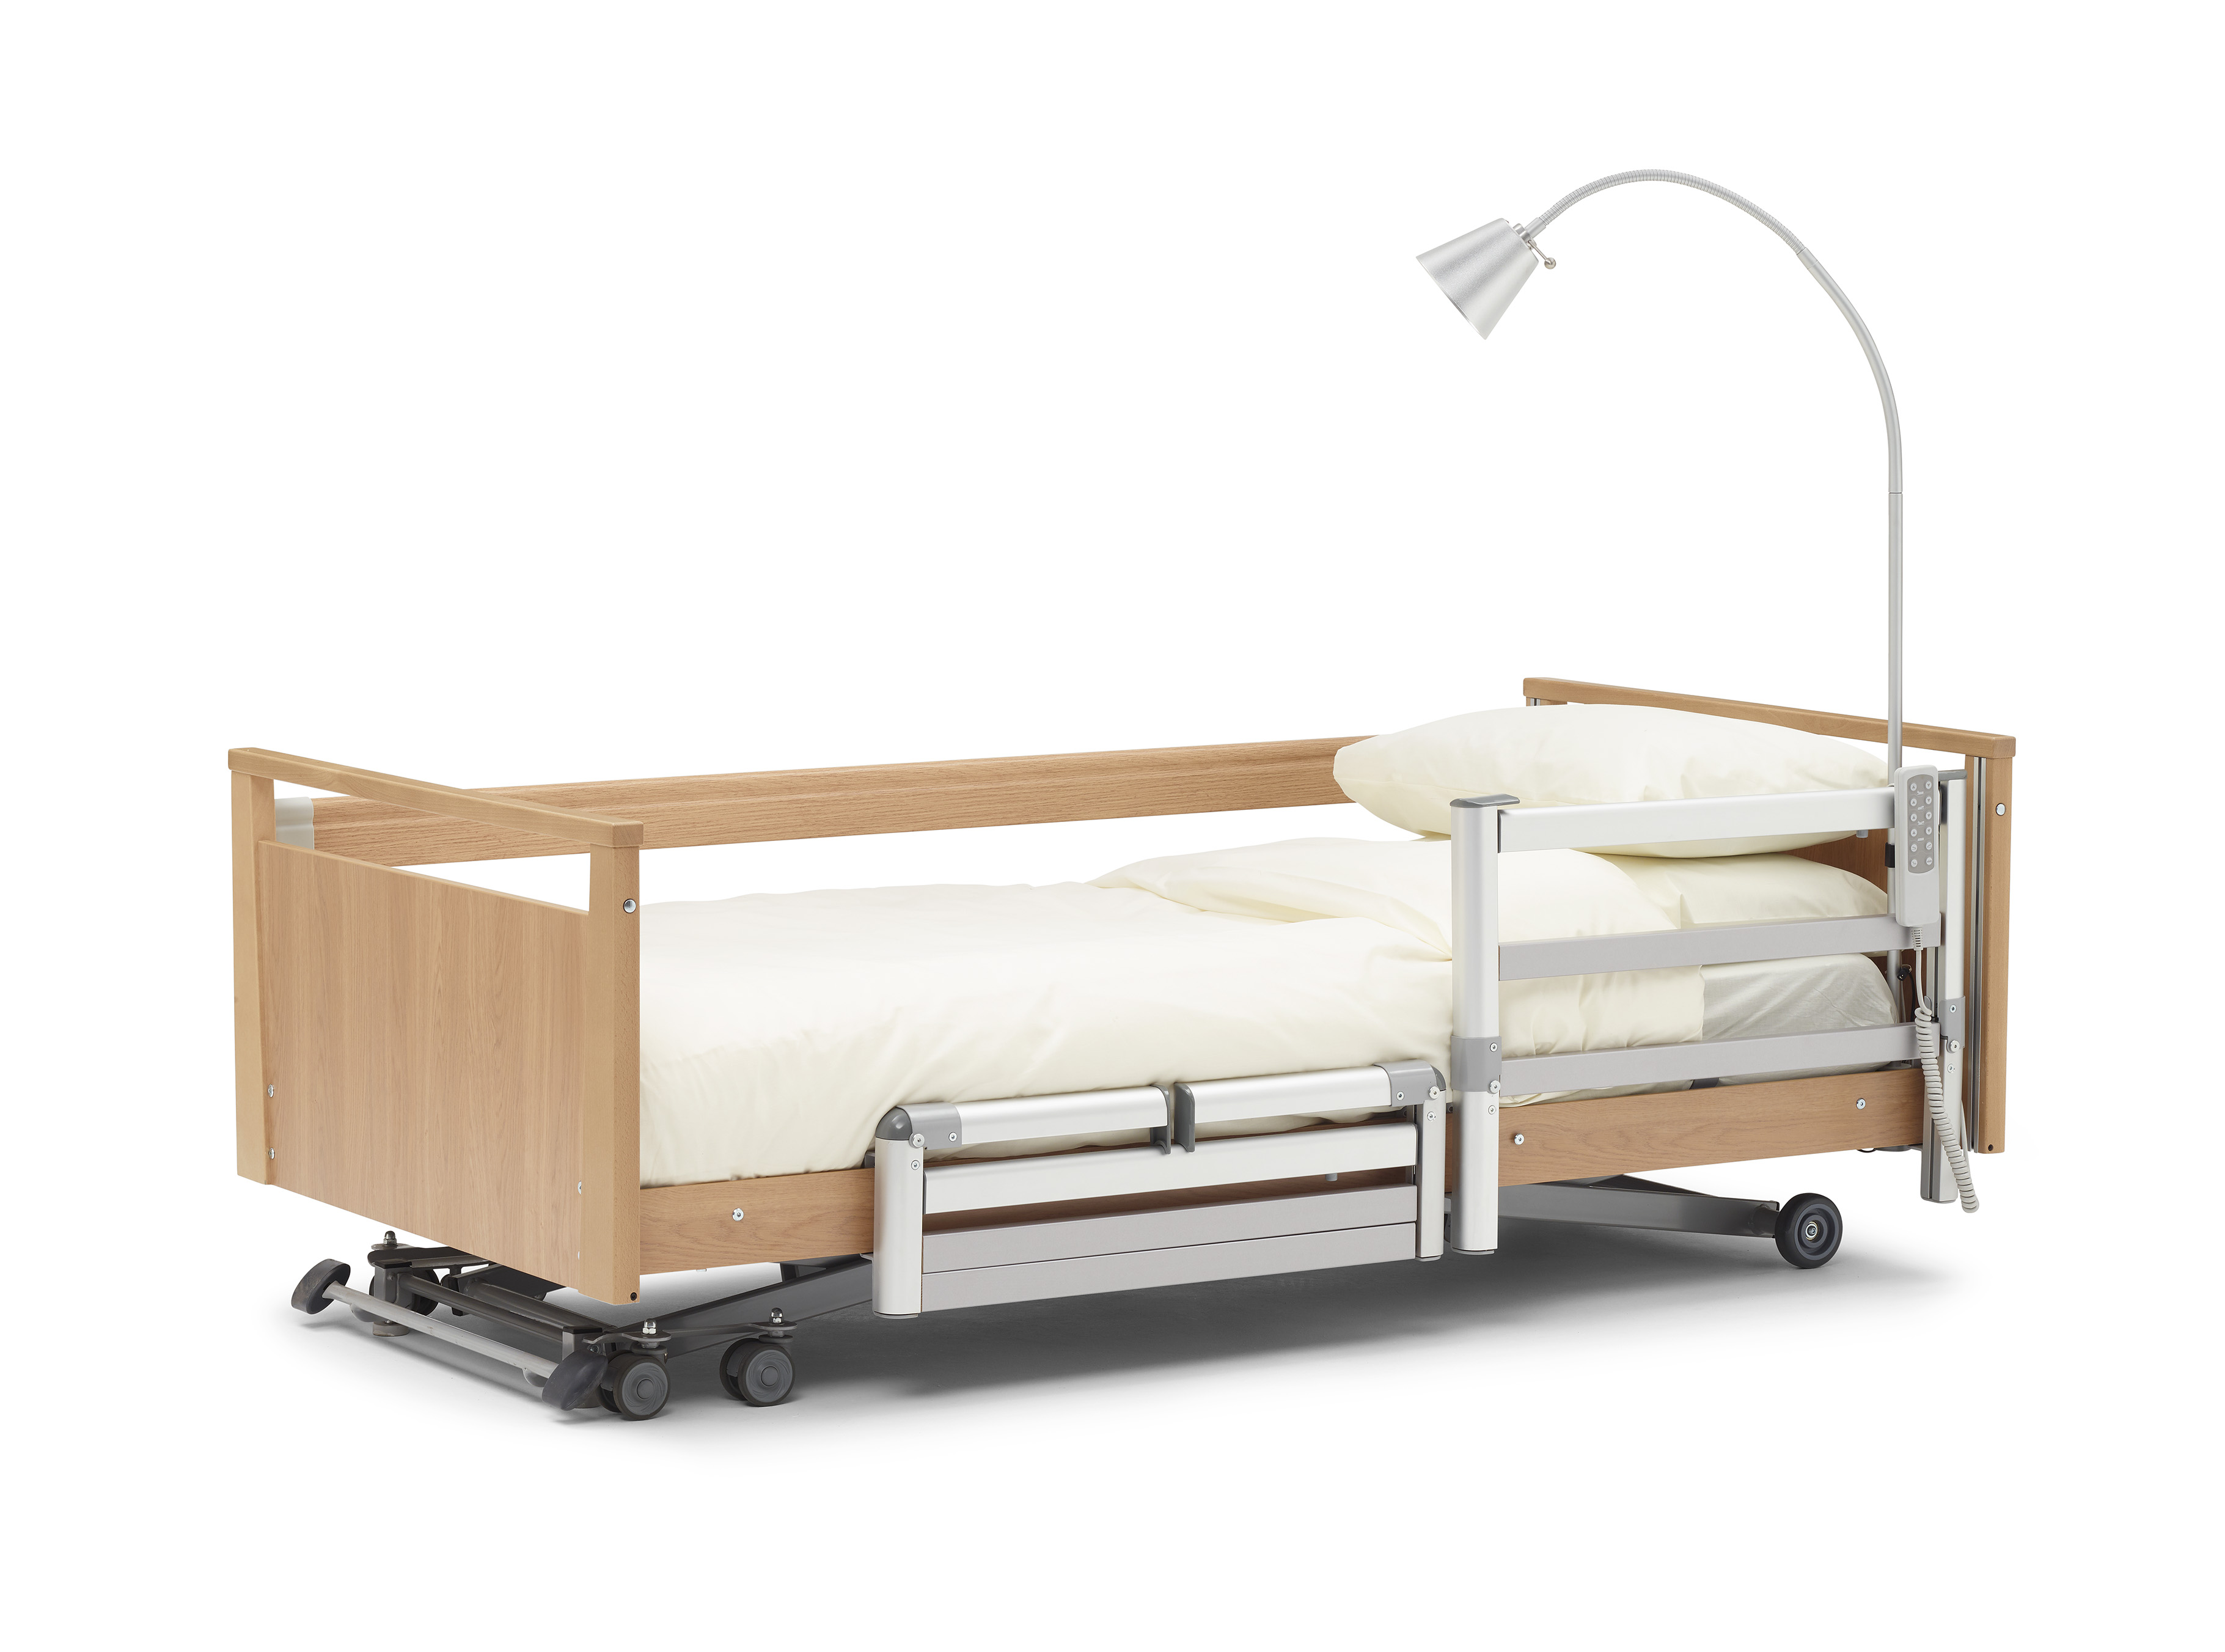 Impress 3 bed c/w Contemporary head/foot boards and side rails only
Finish: Light Sorano Oak